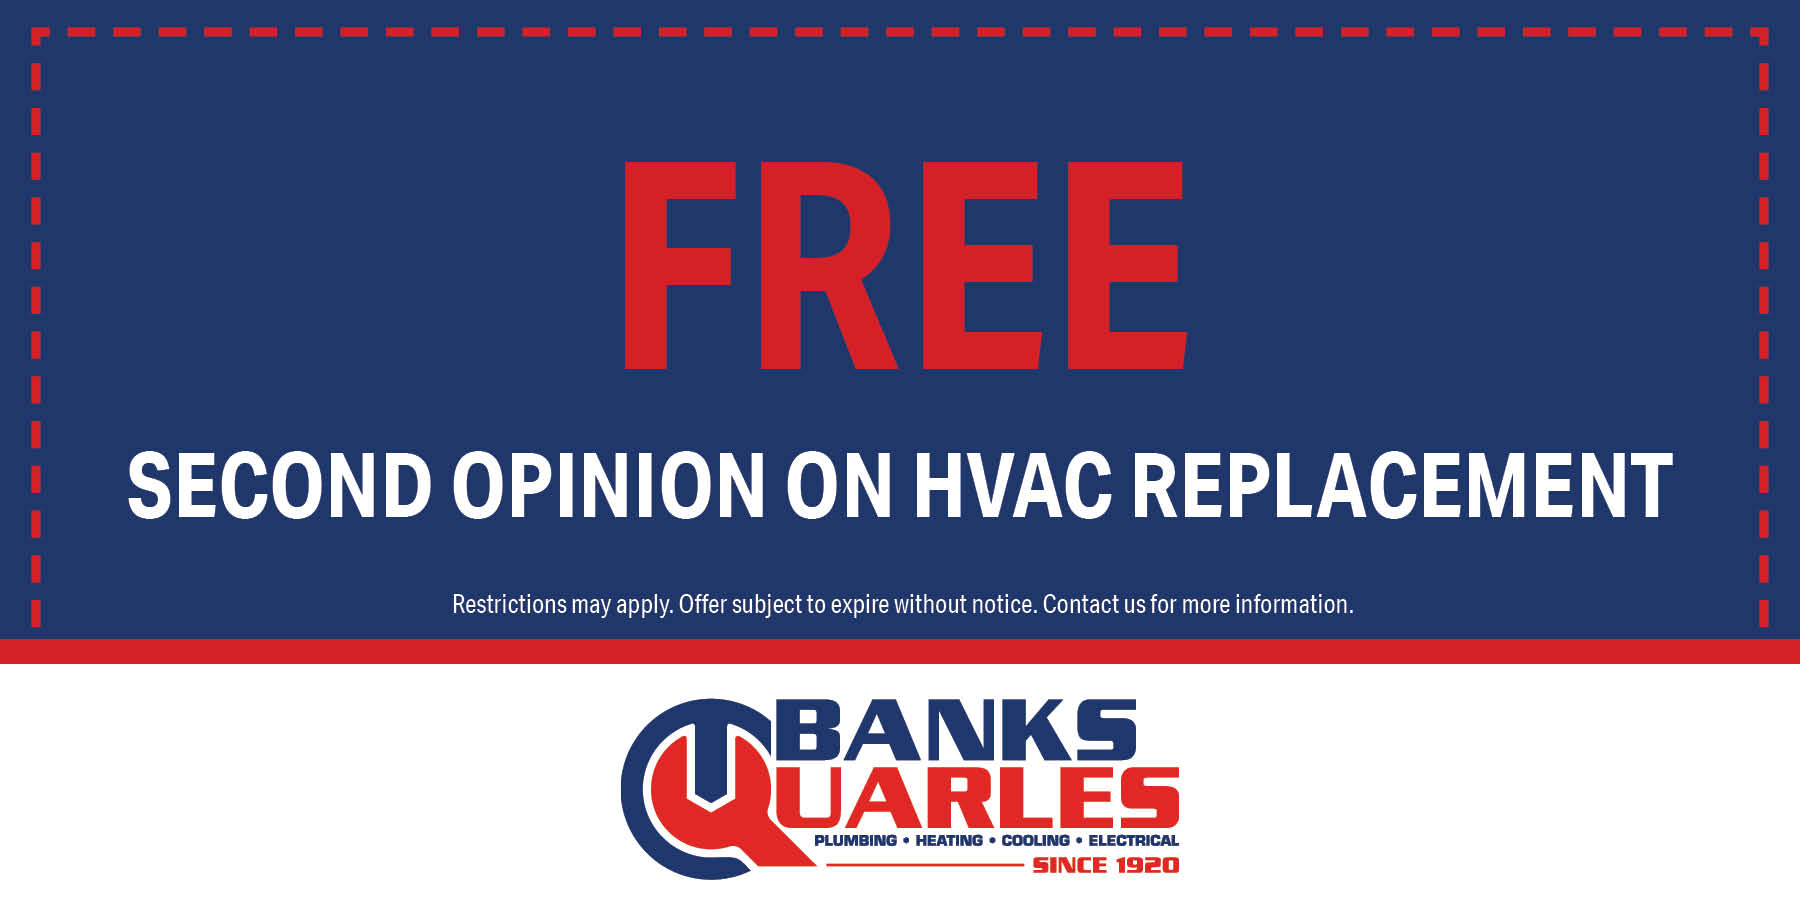 Free second opinion on HVAC replacement. Offer subject to expire without warning. Contact us for details.